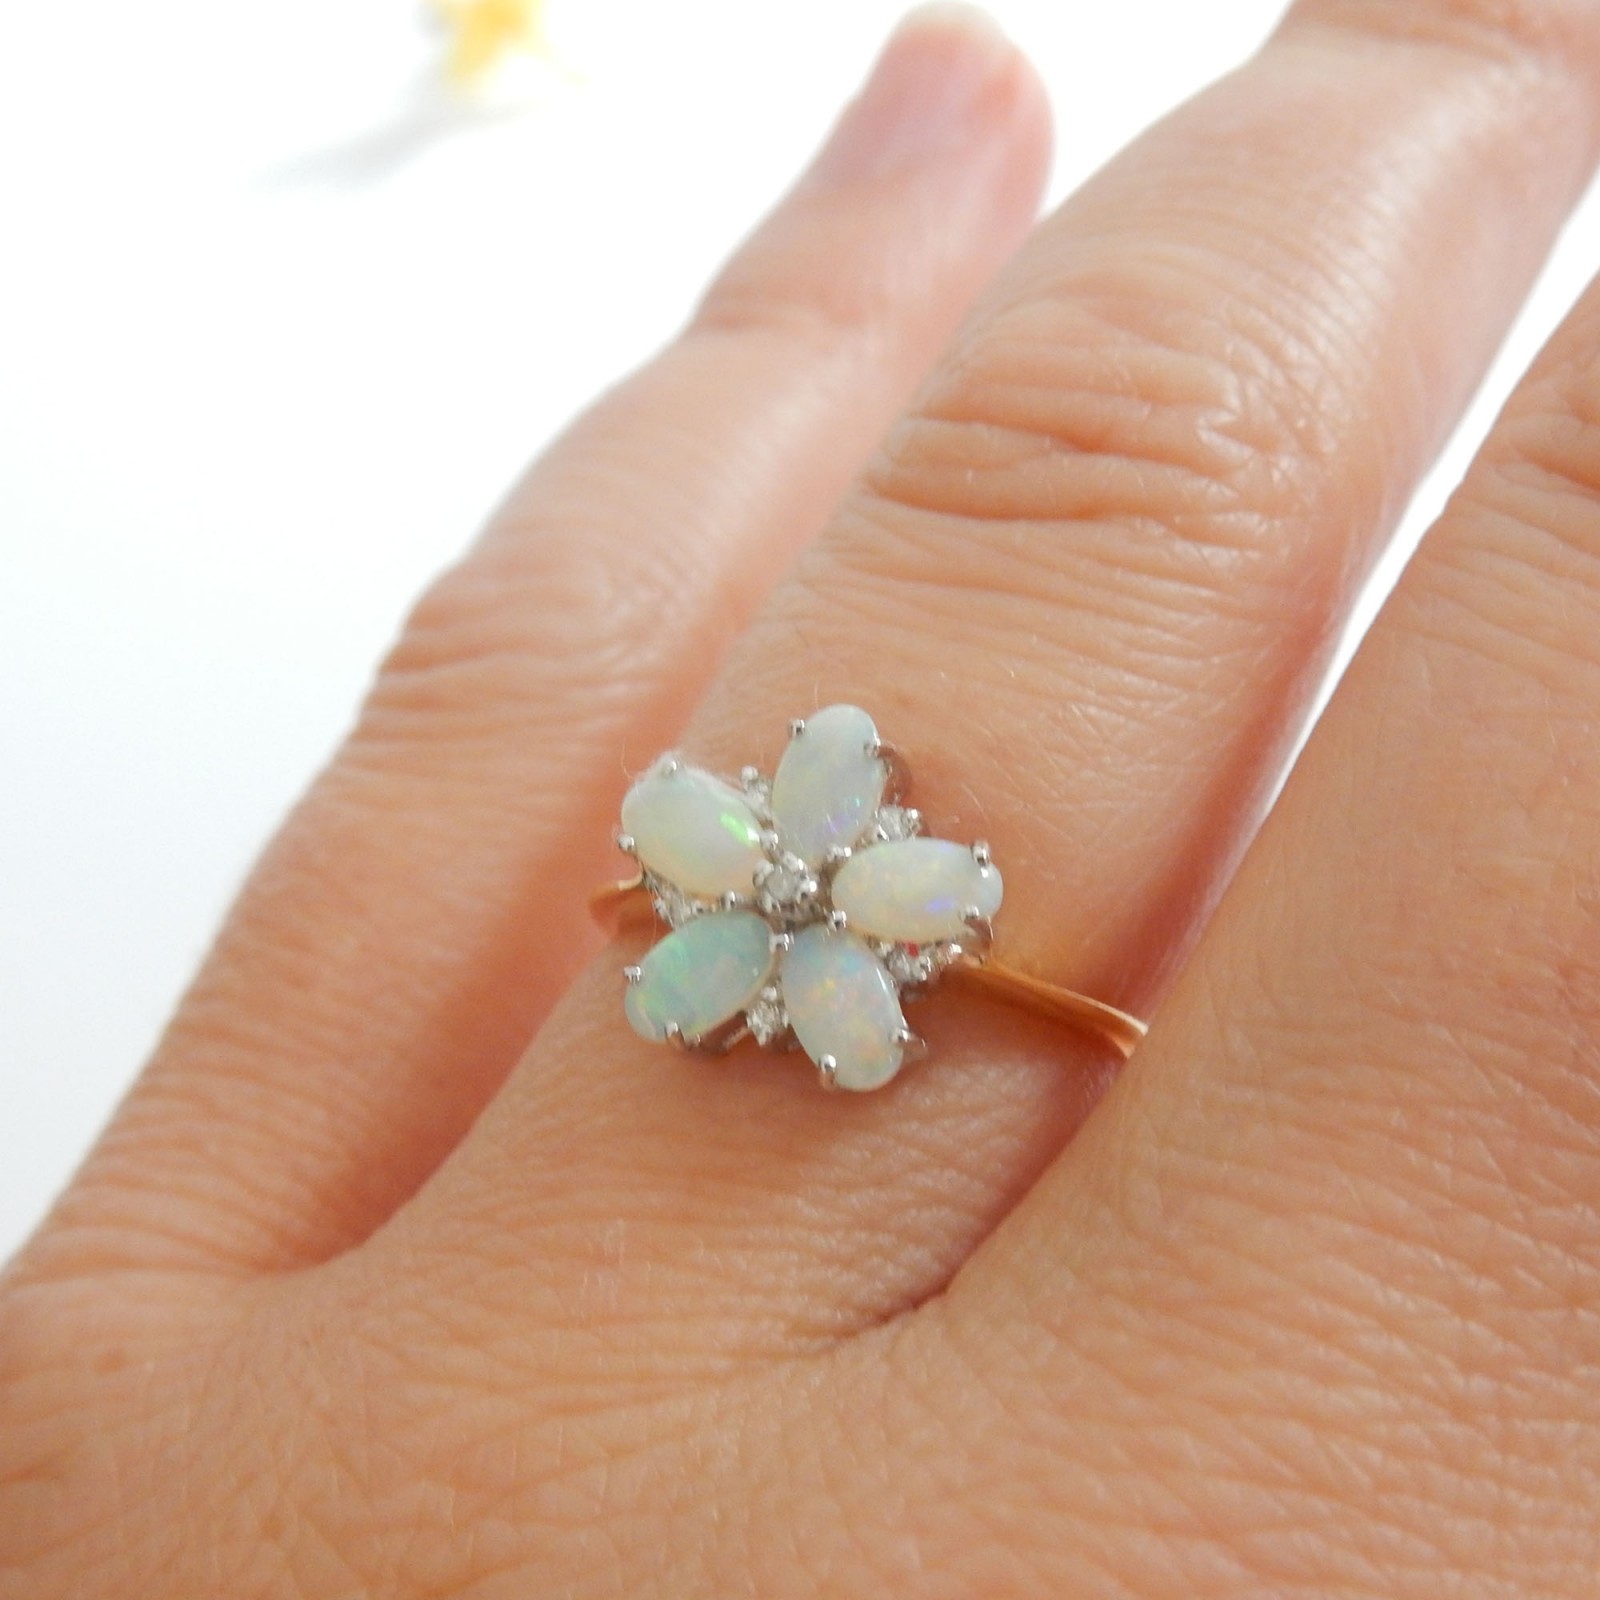 Photo of Vintage Vermeil Gold Opal Diamond Flower Ring Sterling Silver Ring Size 6 3/4